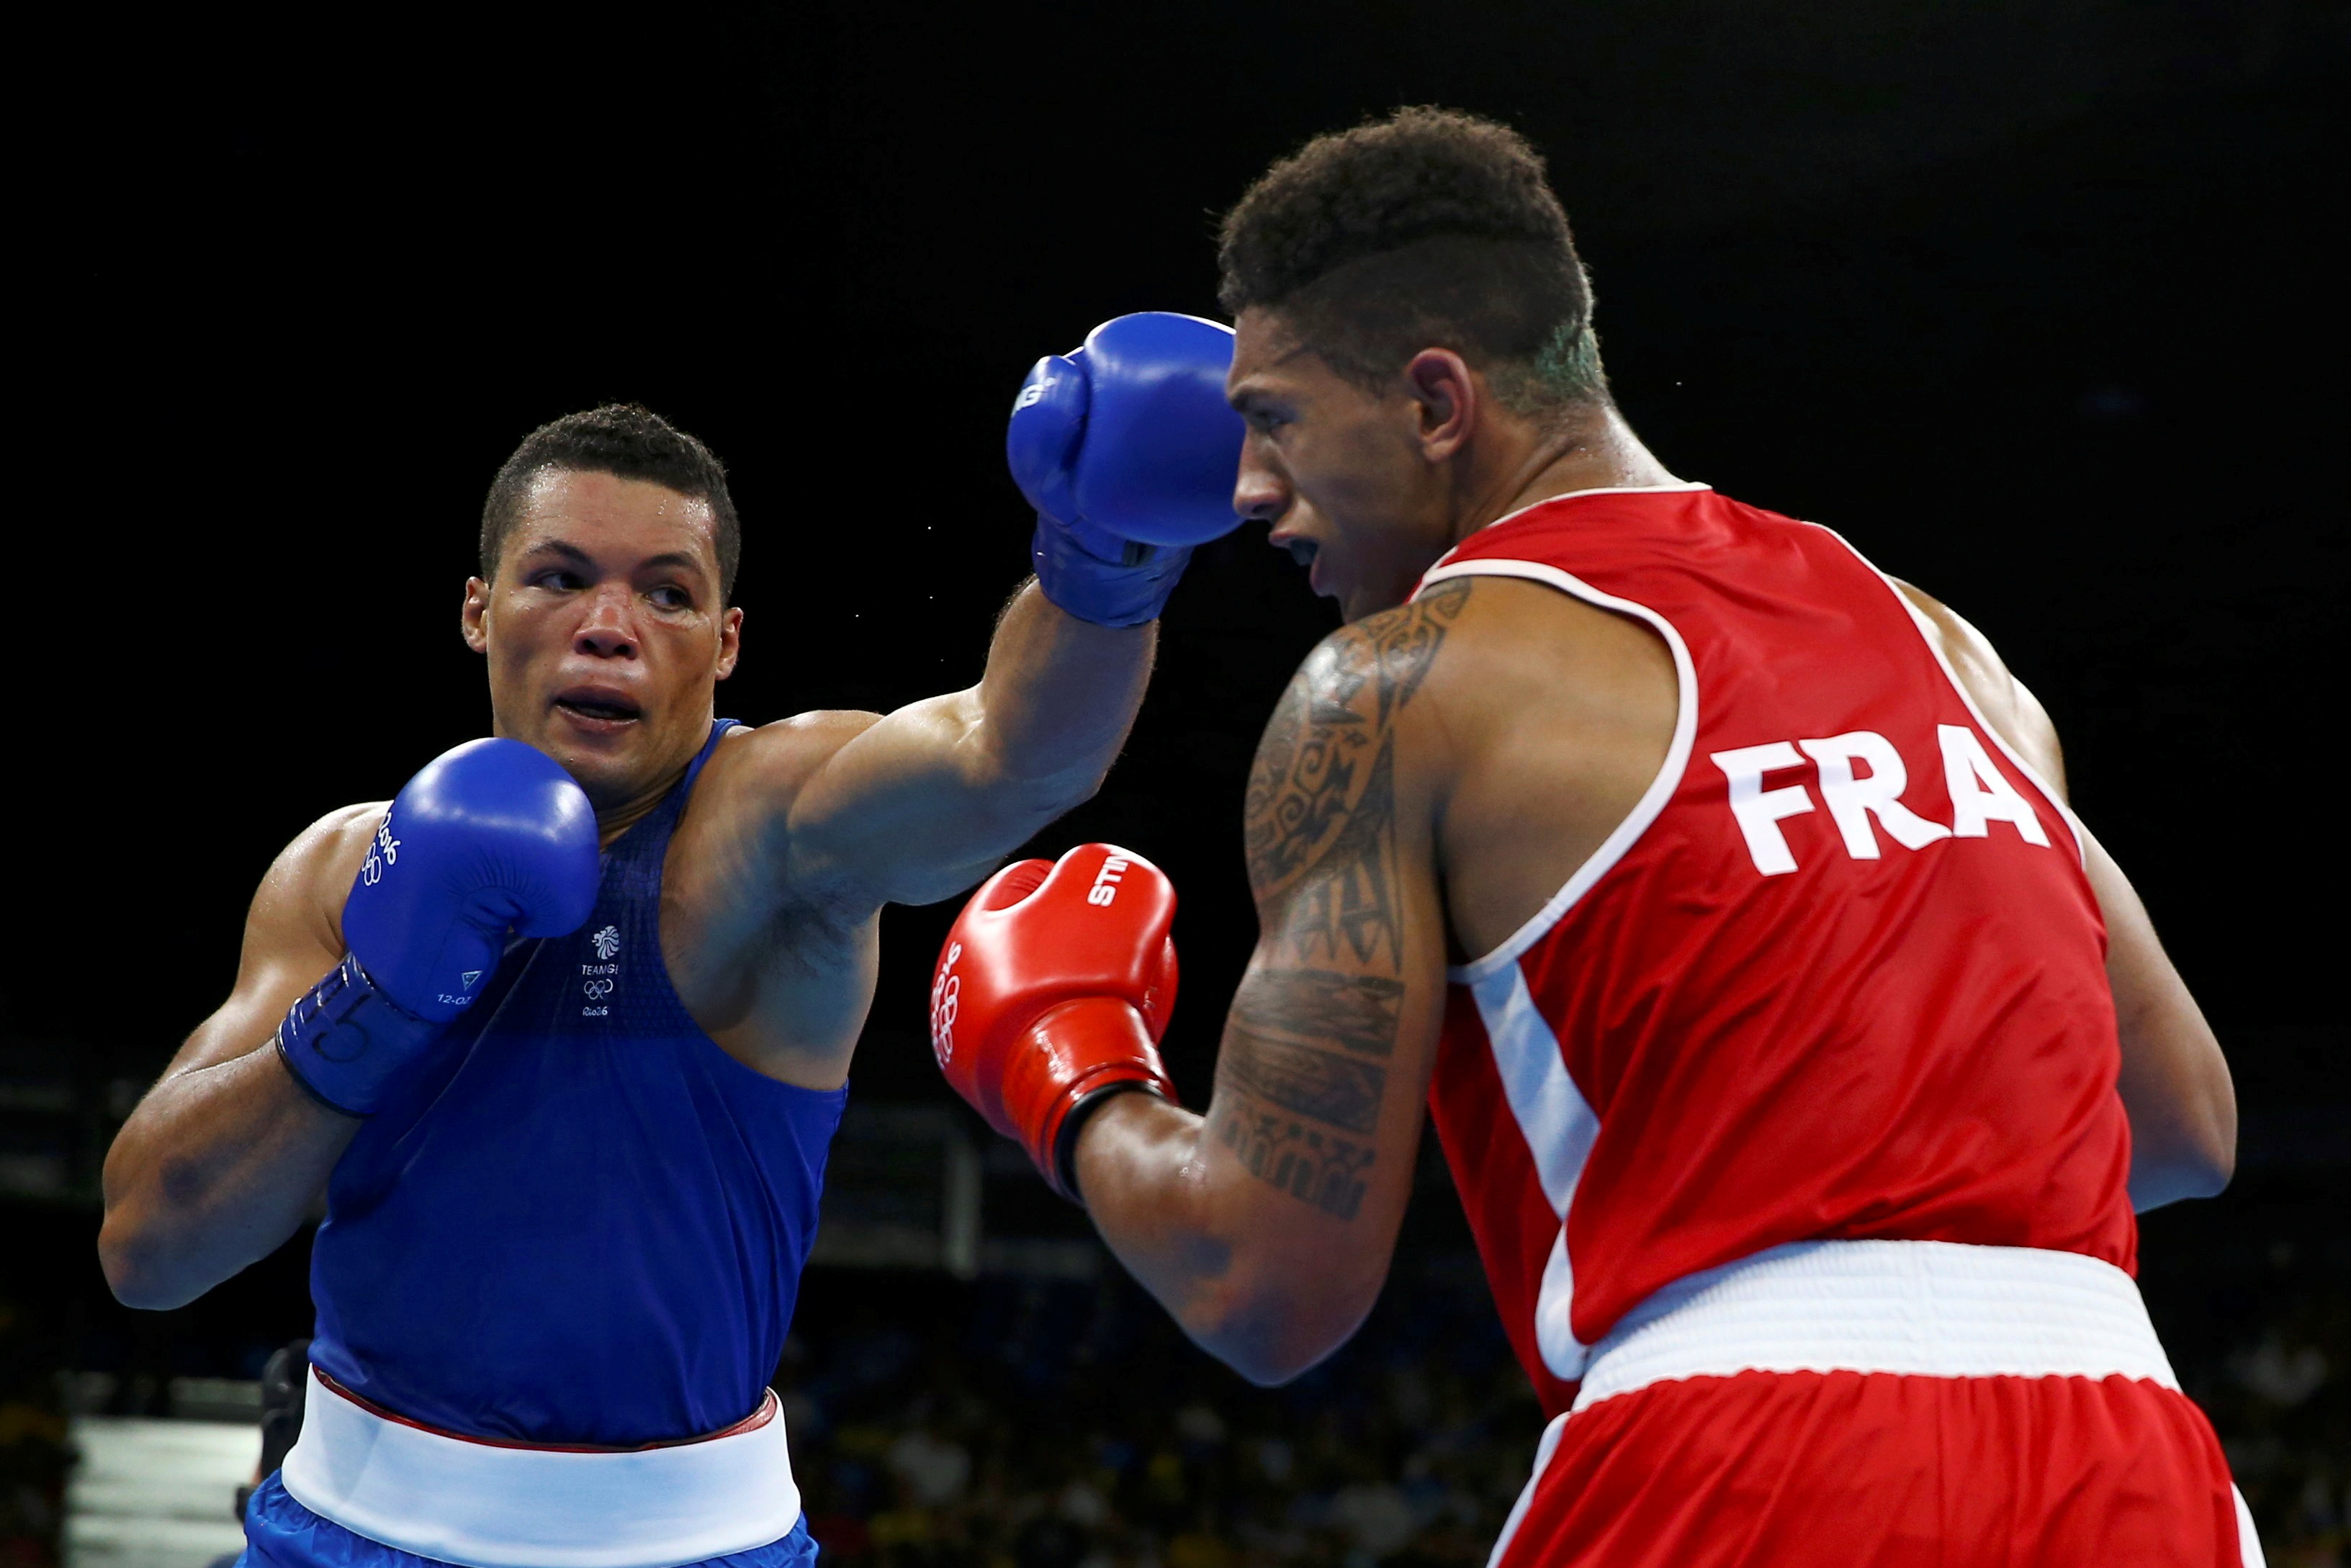 FILE PHOTO: 2016 Rio Olympics - Boxing - Final - Men's Super Heavy (+91kg) Final Bout 273 - Riocentro - Pavilion 6 - Rio de Janeiro, Brazil - 21/08/2016. Tony Yoka (FRA) of France and Joseph Joyce (GBR) of Britain compete. REUTERS/Peter Cziborra FOR EDITORIAL USE ONLY. NOT FOR SALE FOR MARKETING OR ADVERTISING CAMPAIGNS./File Photo